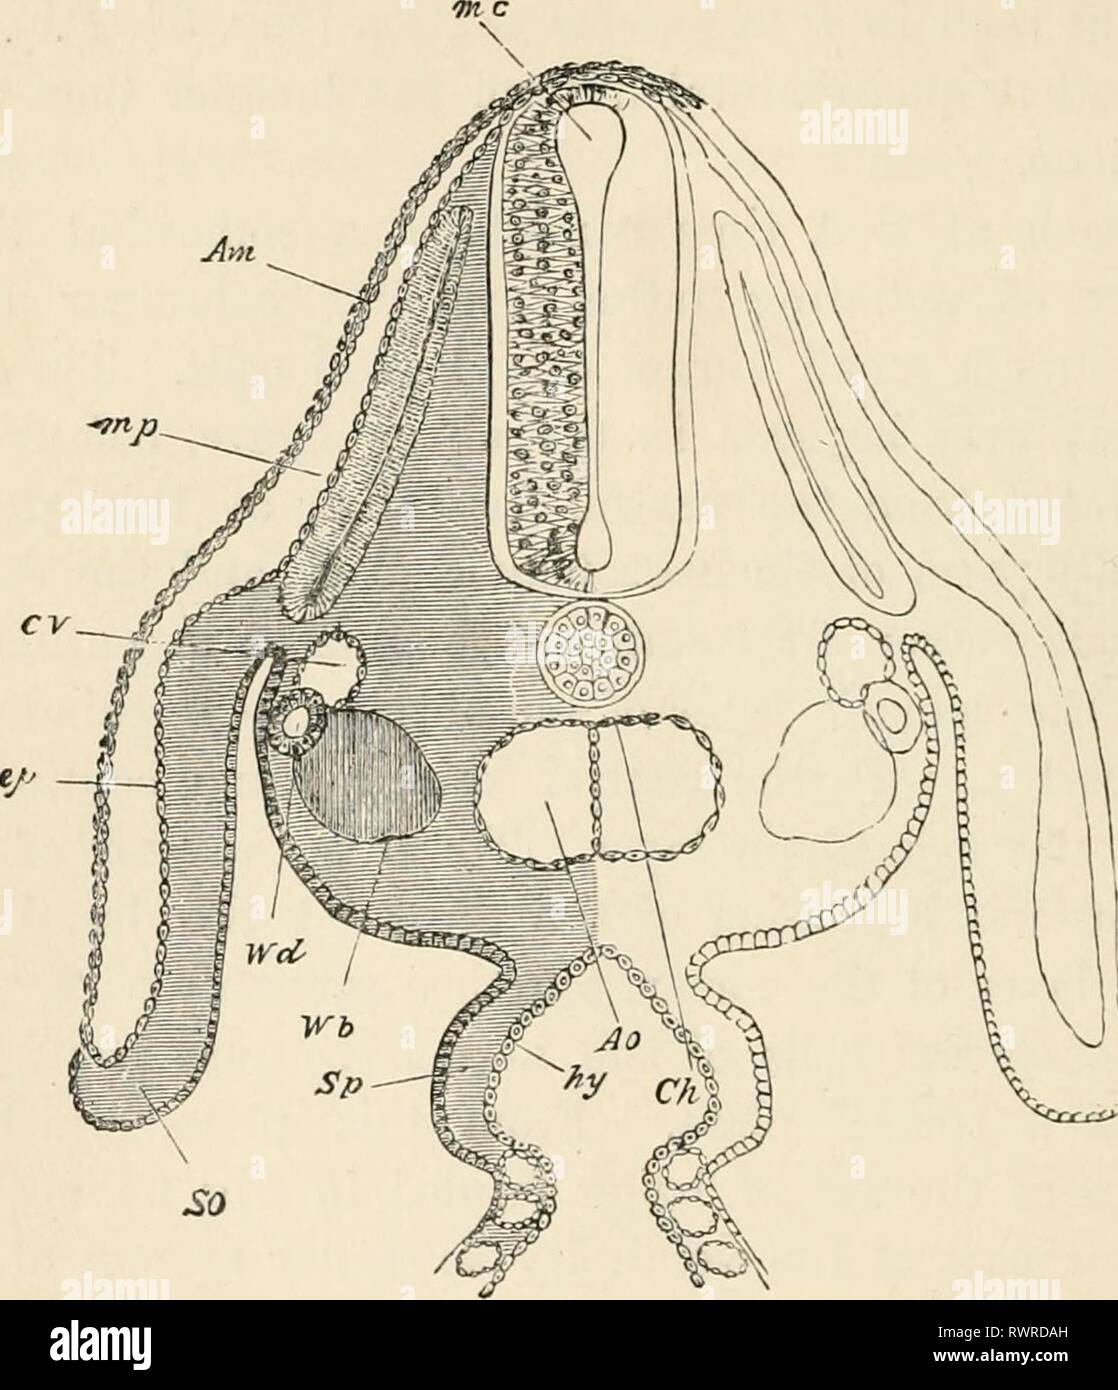 The elements of Embryology (1889) The elements of Embryology elementsofembryo00fostuoft Year: 1889  188 THE THIRD DAY. Fig. 65. [criAP    J Section through the Dorsal Region of an Embryo Chick. AT the end of the Third Day. Am. amnion, m.p. muscle-plate. C. V. cardinal vein. Ao. dorsal aorta. The section passes through the point where the dorsal aorta is just commencing to divide into two branches. Ch. notochord. W. d. AVolihan duct. W. b. commencing differentiation of the mesoblast cells to form the Wolffian body. cp. epiblast. SO. somatopleure. Sp. splanchno- pleure. hi/, hypoblast. The secti Stock Photo